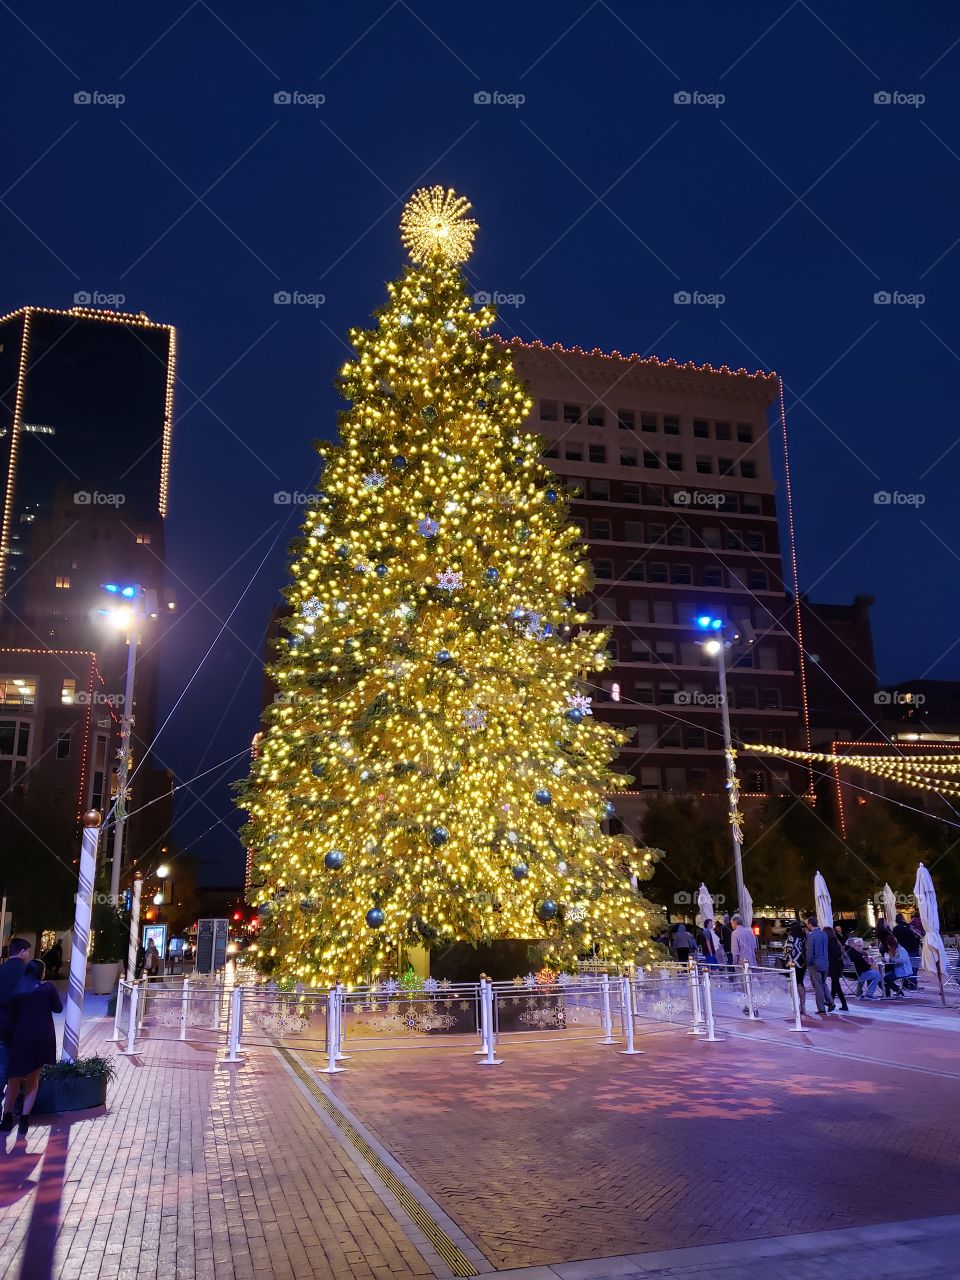 Christmas Tree in Sundance Square, Downtown Fort Worth, Texas